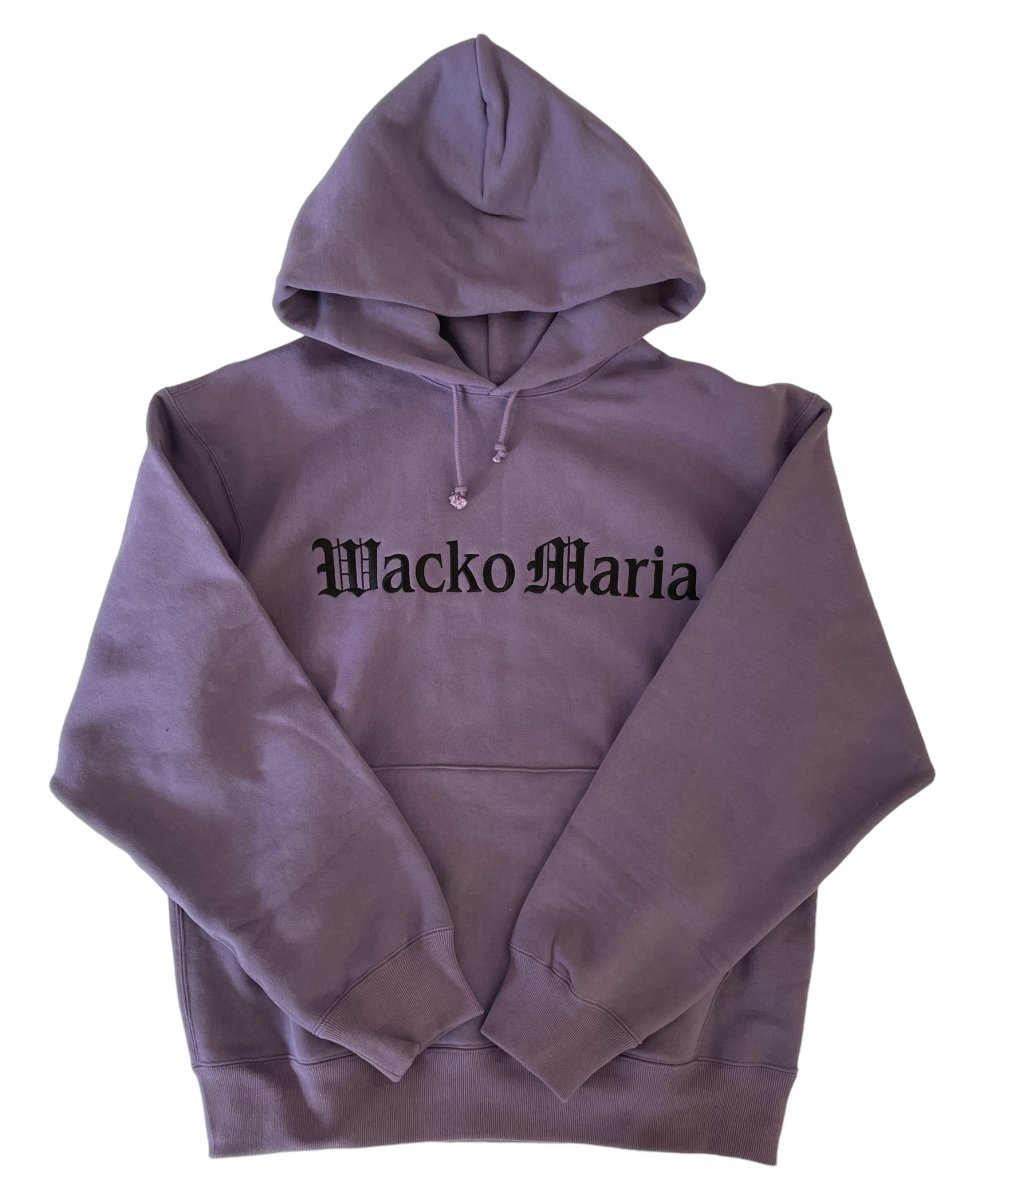 WACKOMARIA《ワコマリア》MIDDLE WEIGHT PULLOVER HOODED SWEAT SHIRT 